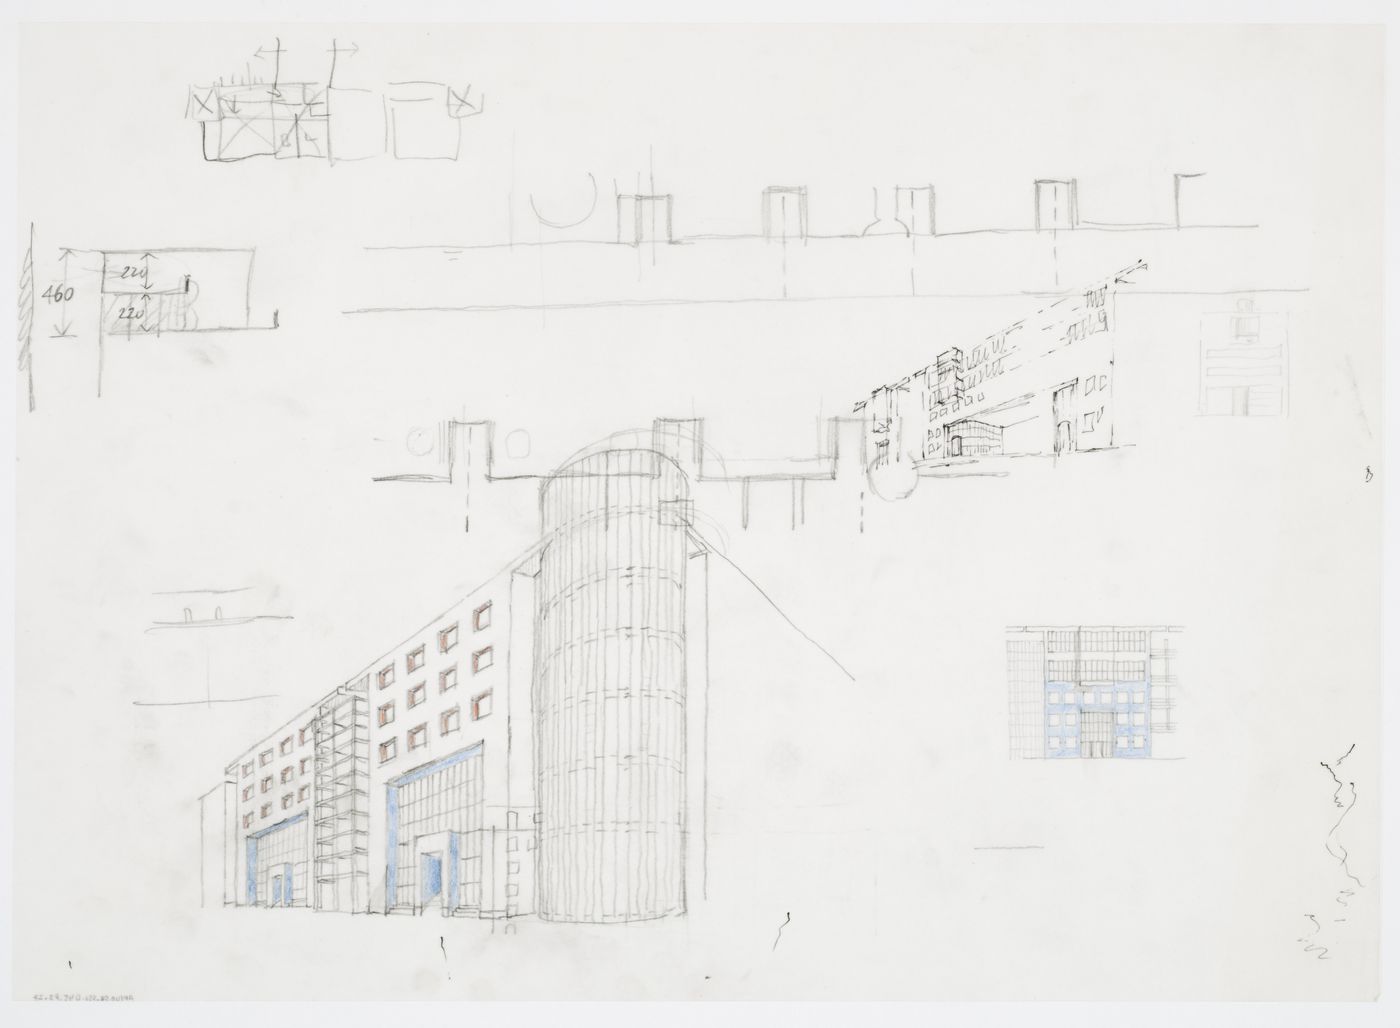 Hotel, Meineke Strasse, Berlin, Germany: perspective and sketches